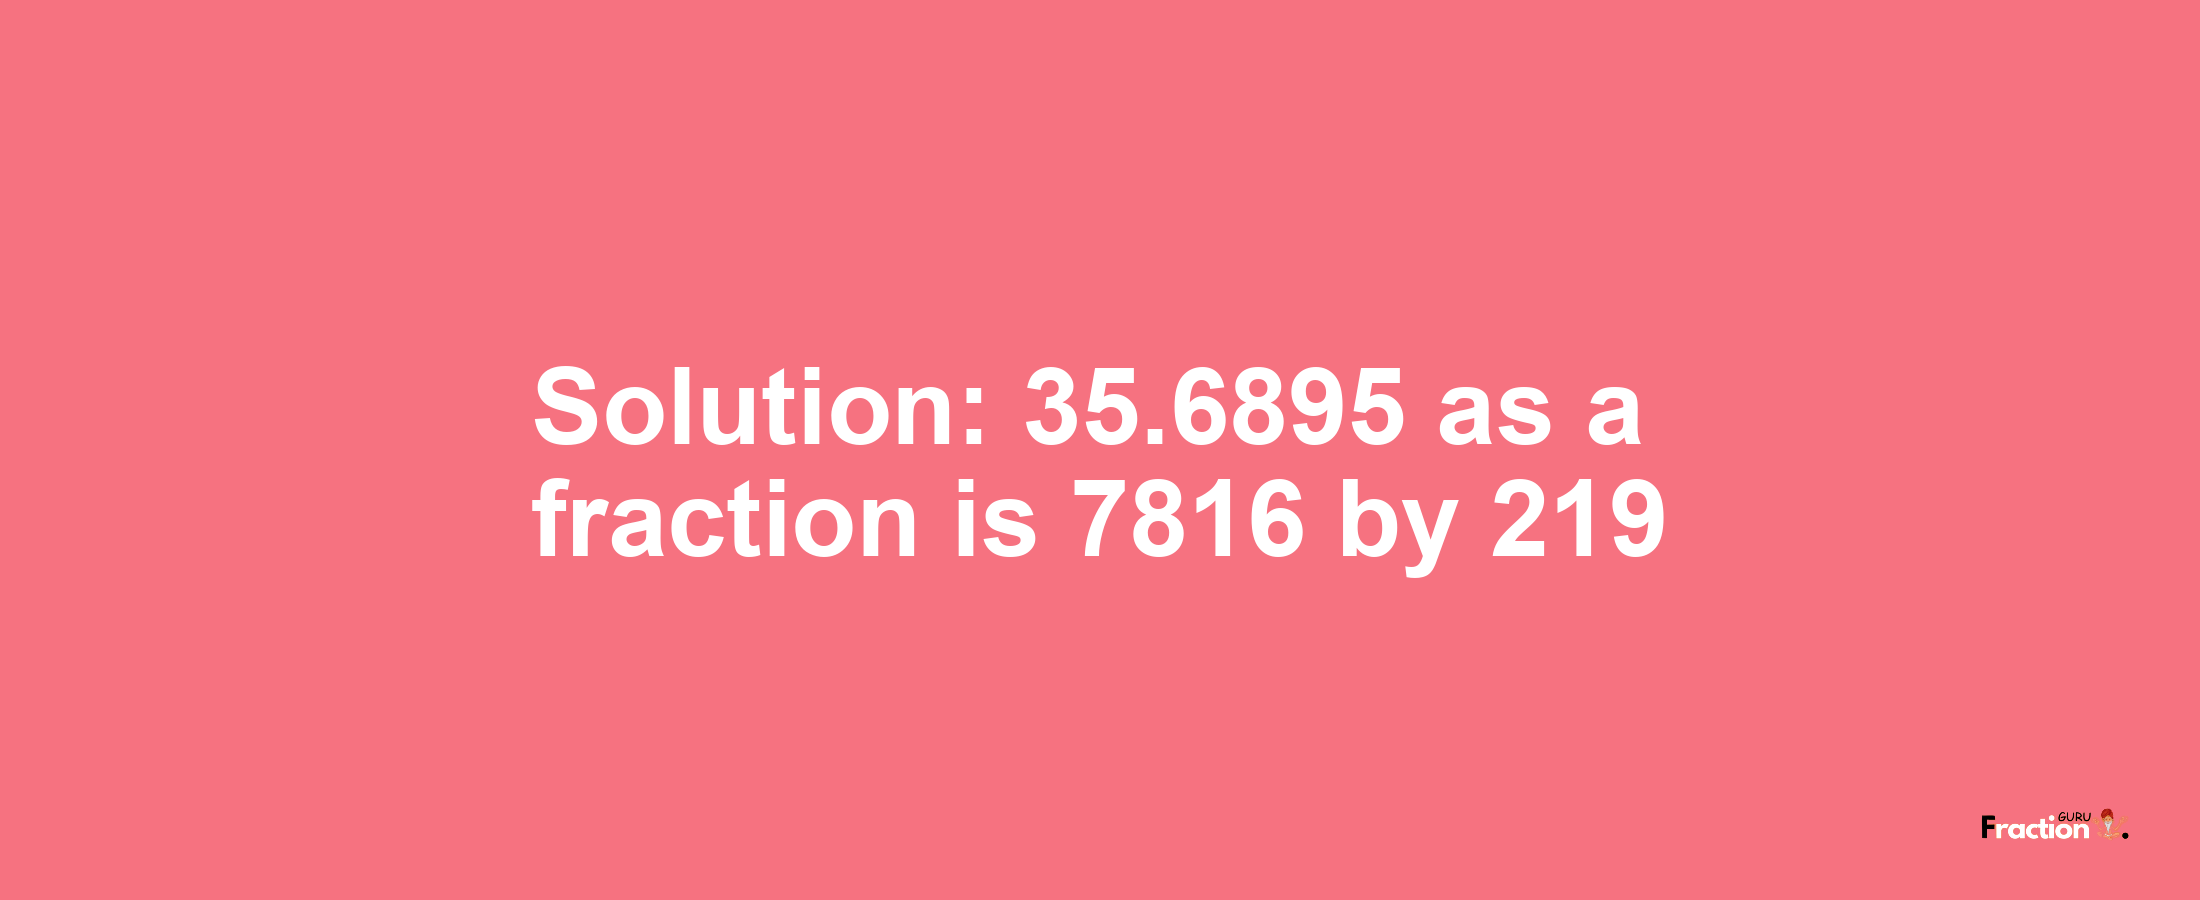 Solution:35.6895 as a fraction is 7816/219